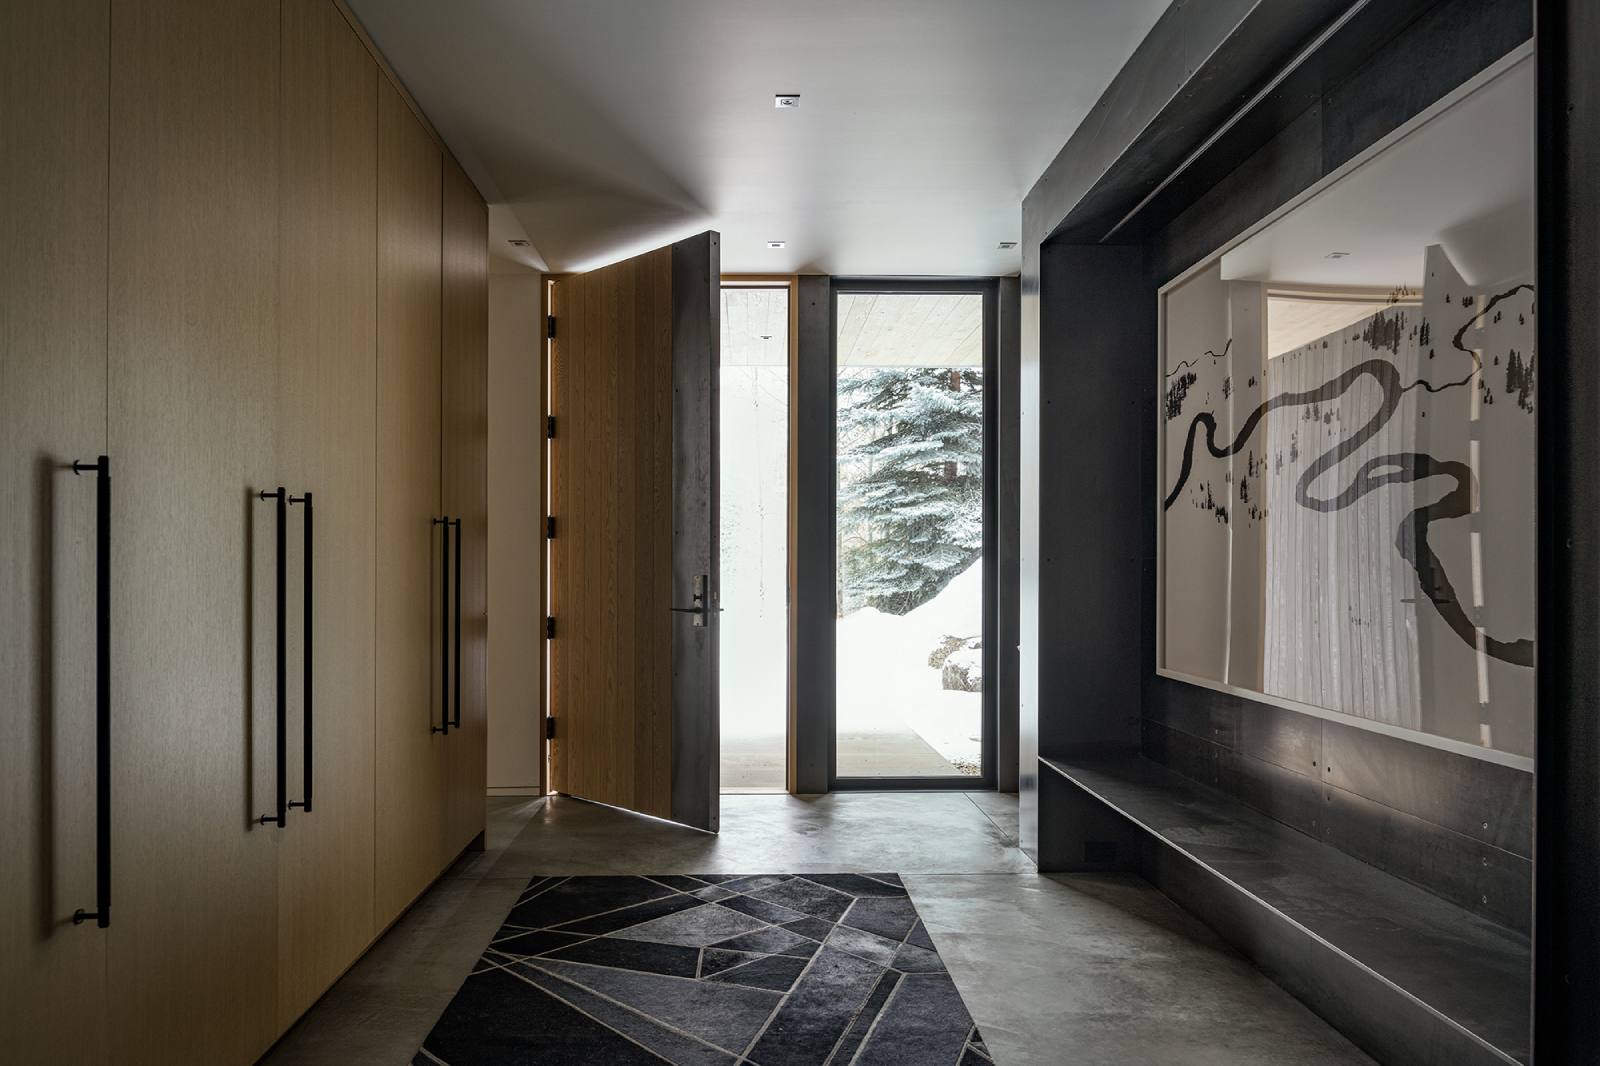 Interior view of the front entryway at Avalanche Chalet, a custom home designed and built by Farmer Payne Architects.